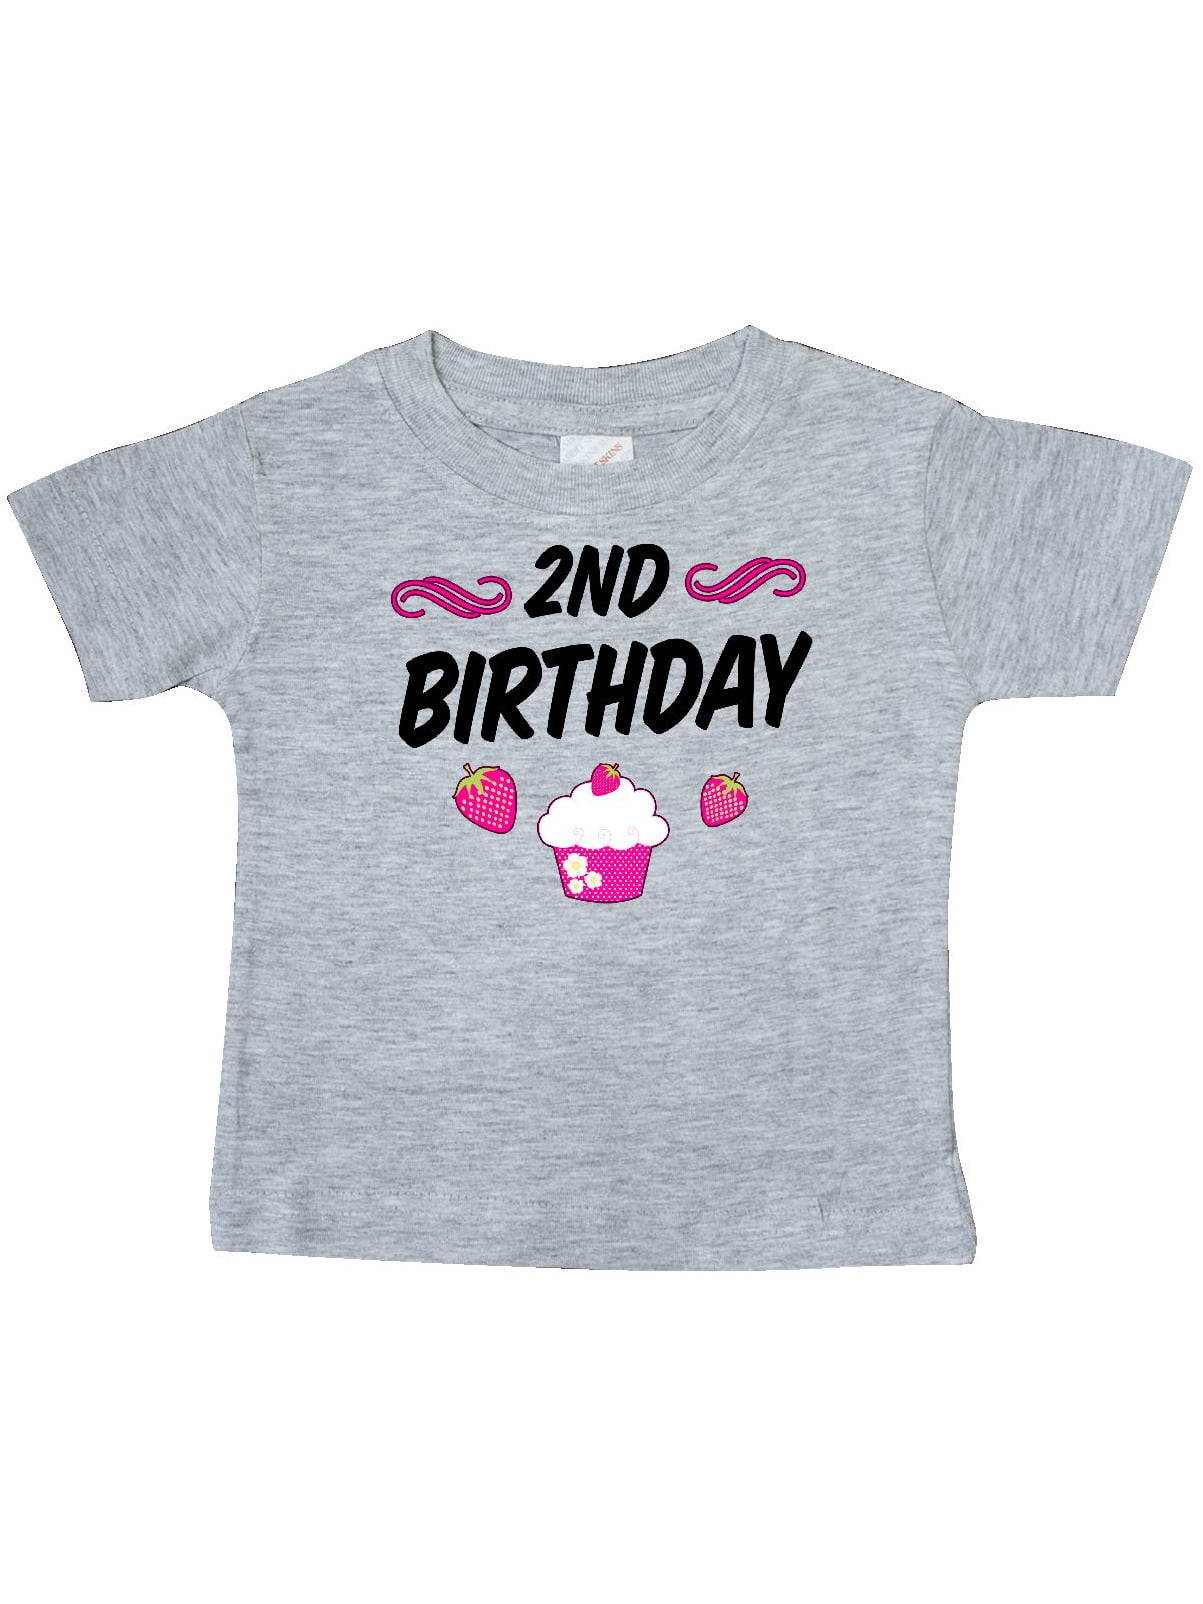 Details about   ~NEW~ 2nd BIRTHDAY 2 Year Baby Girls Cupcake PRINCESS Shirts 18-24 Month 2T Gift 